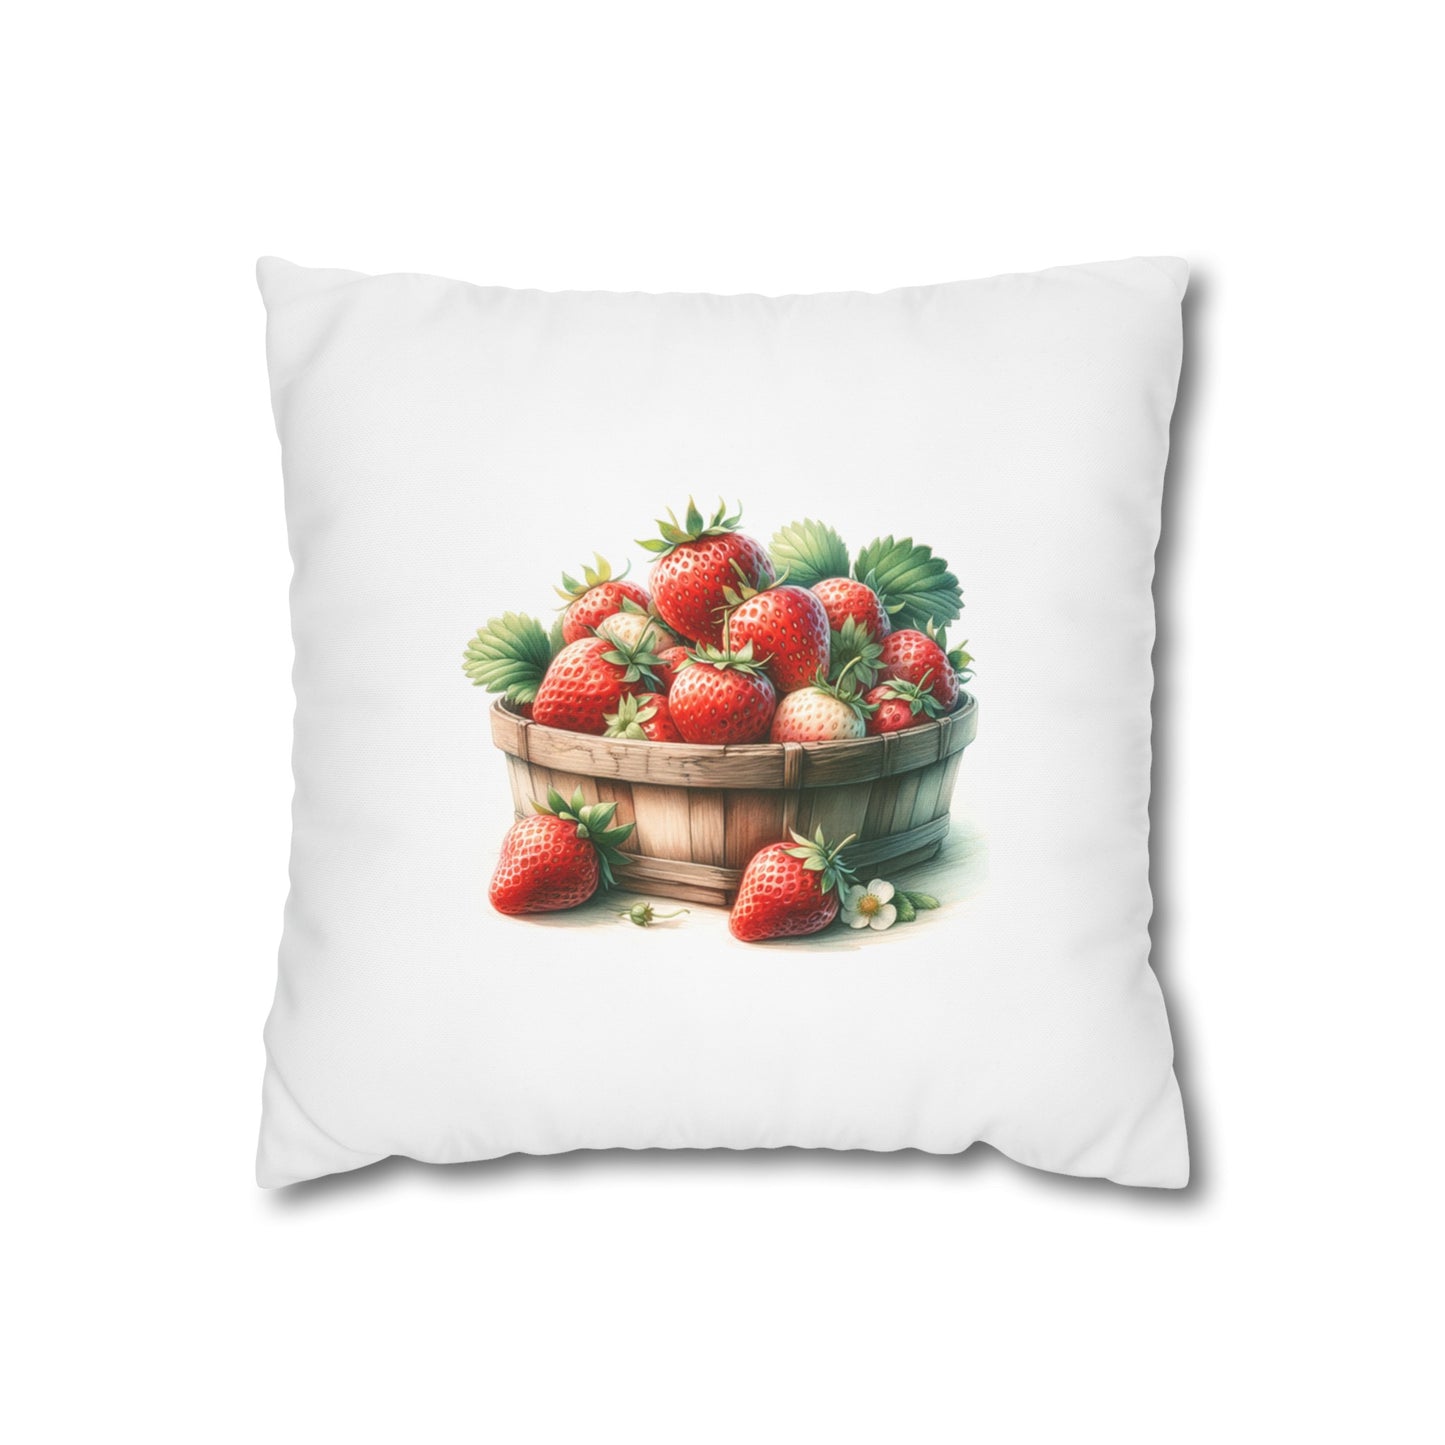 Berry Delicious Strawberry #2 Cushion Cover